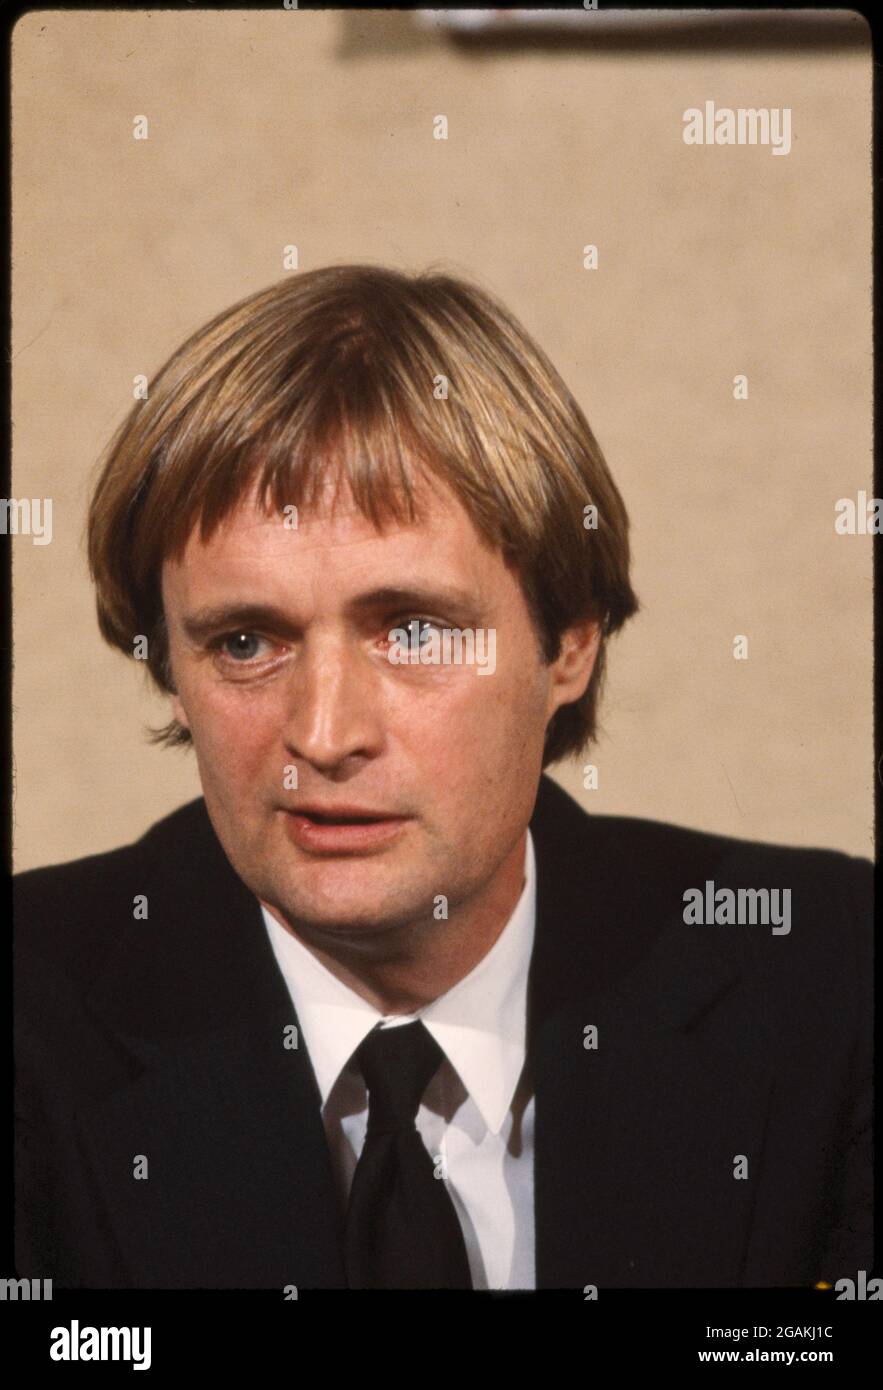 Scottish actor David McCallum (Ilya Kuryakin) in a press photo during publicity for 'Return of the Man From U.N.C.L.E. - The  Fifteen Years Later Affair' CBS reunion movie, New York, NY, 1982. (Photo by Bernard Gotfryd/LOC/RBMVintage Images) Stock Photo